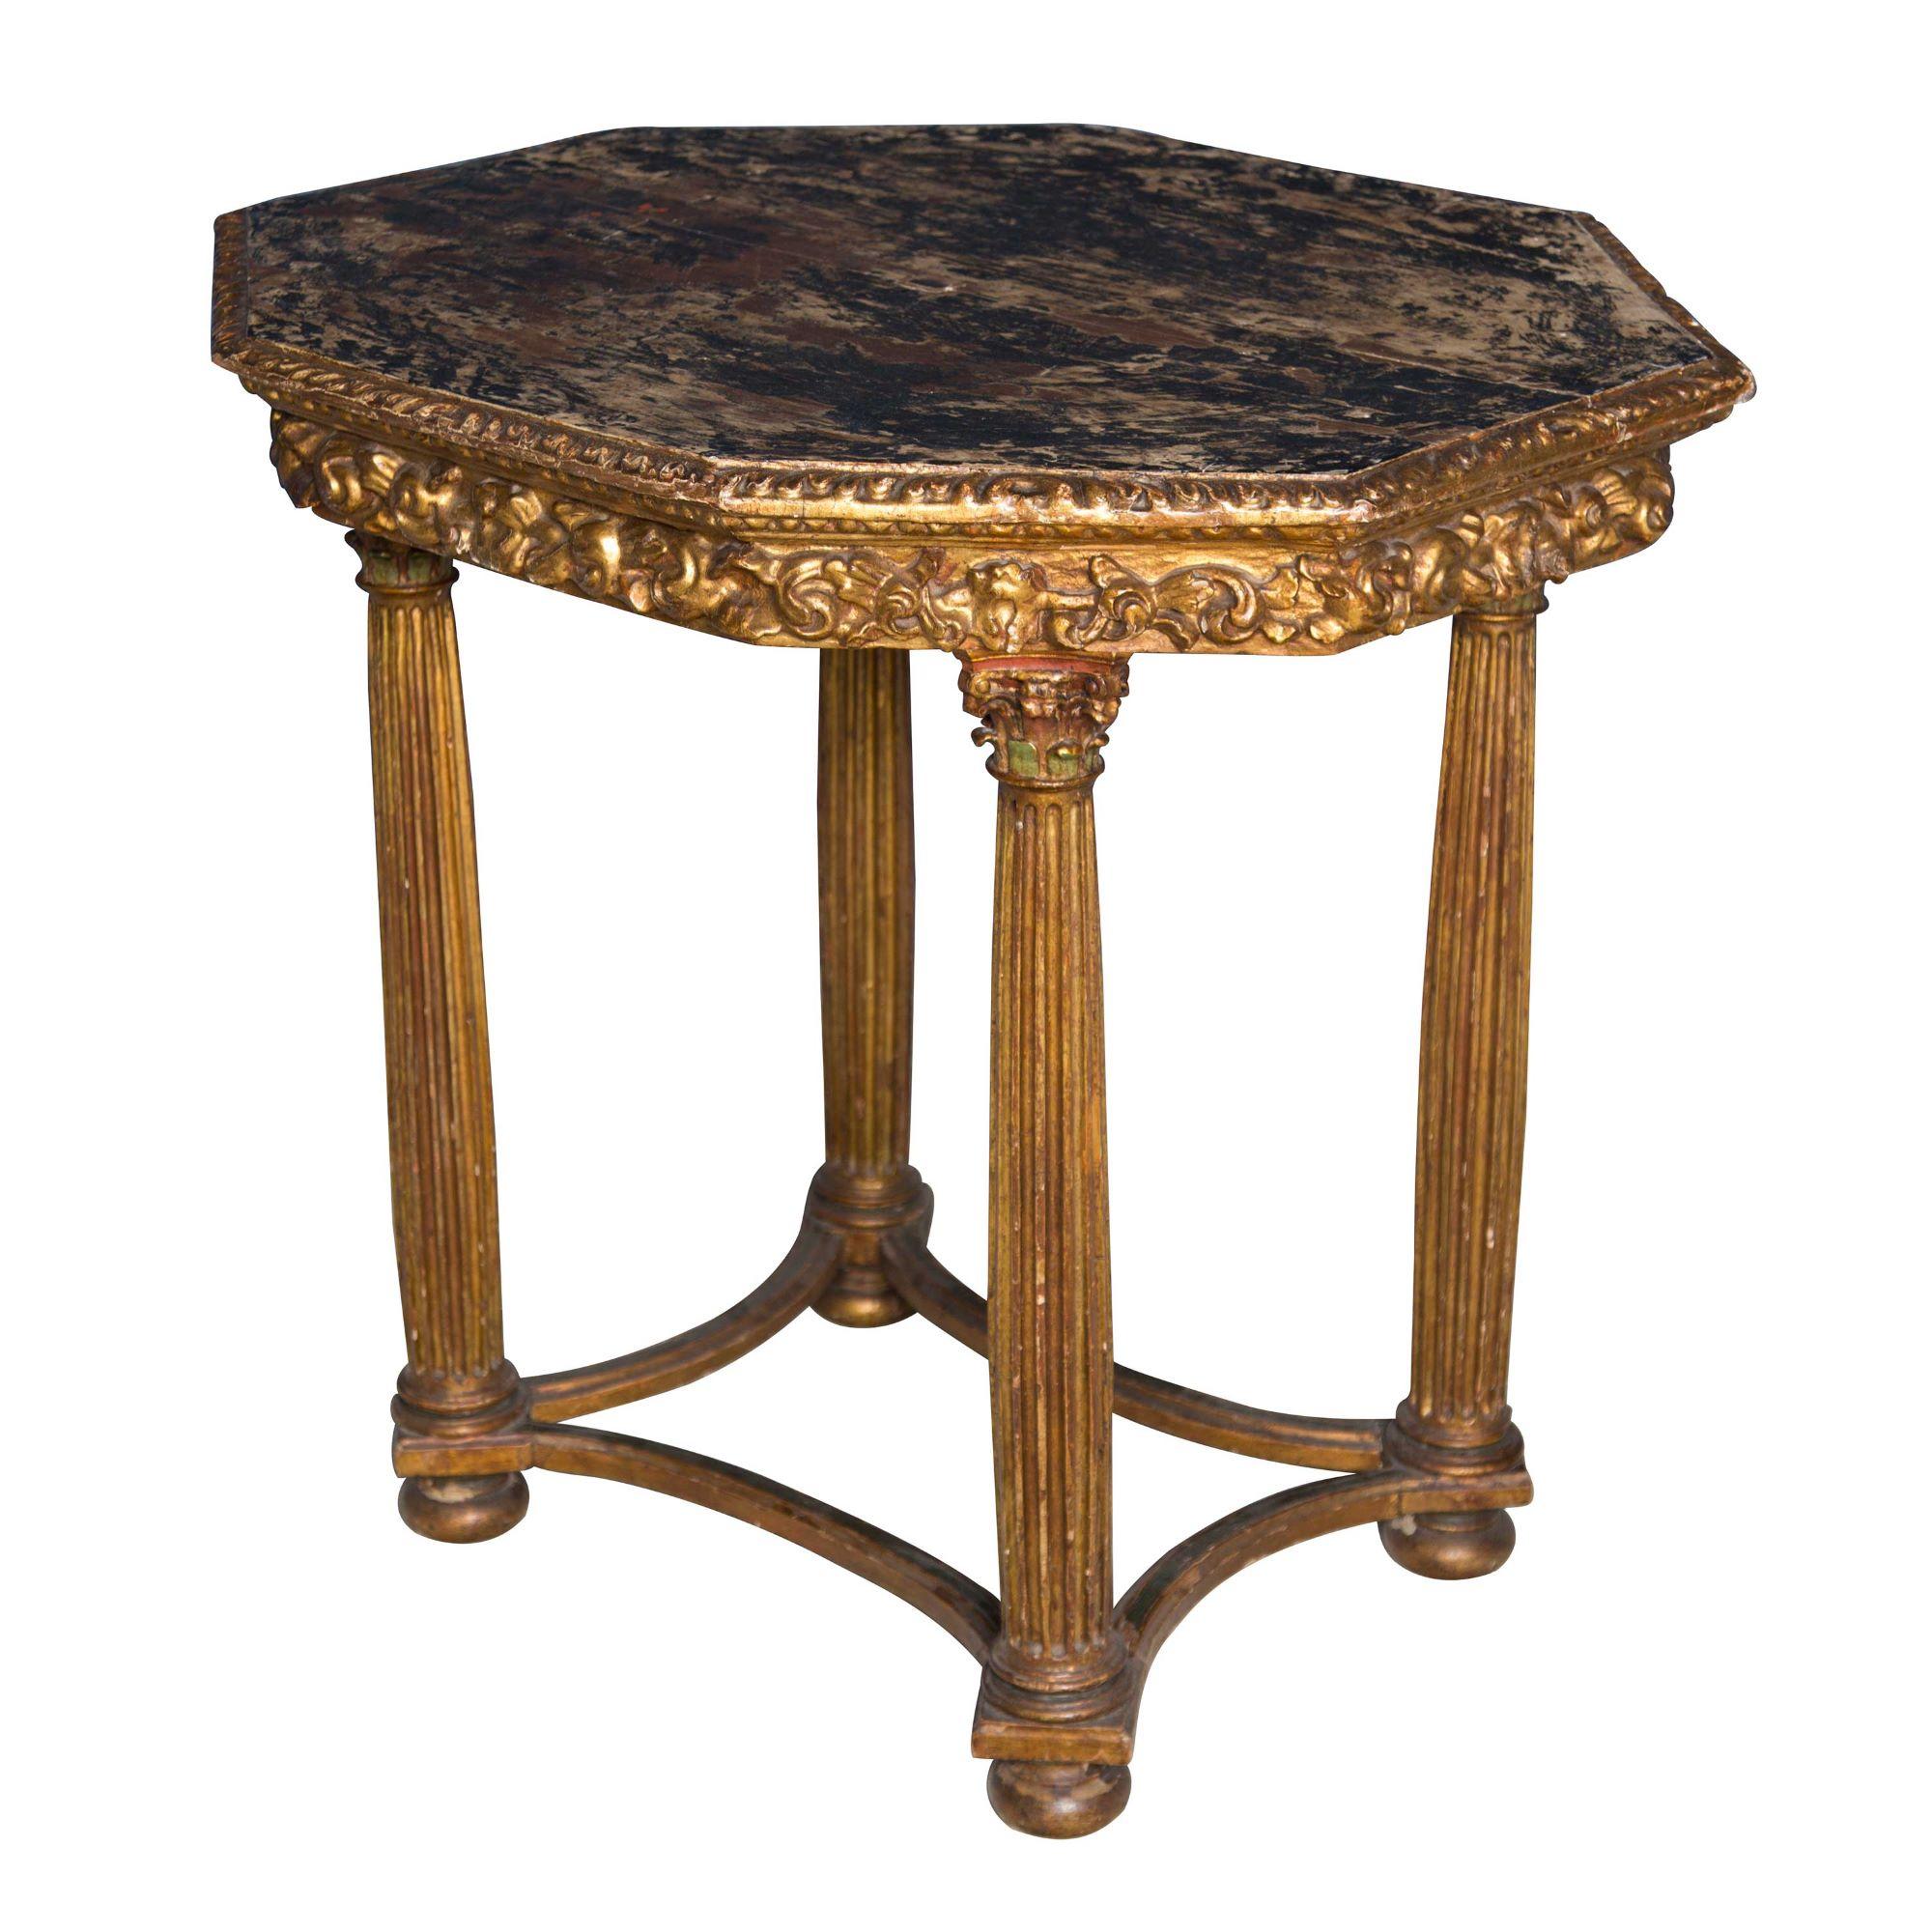 Beautiful gilded 17th century Italian table with carved reeded legs and original painted top. Wonderful decorative carving to the apron and to the tops of the reeded column legs, with elegant curved stretchers.